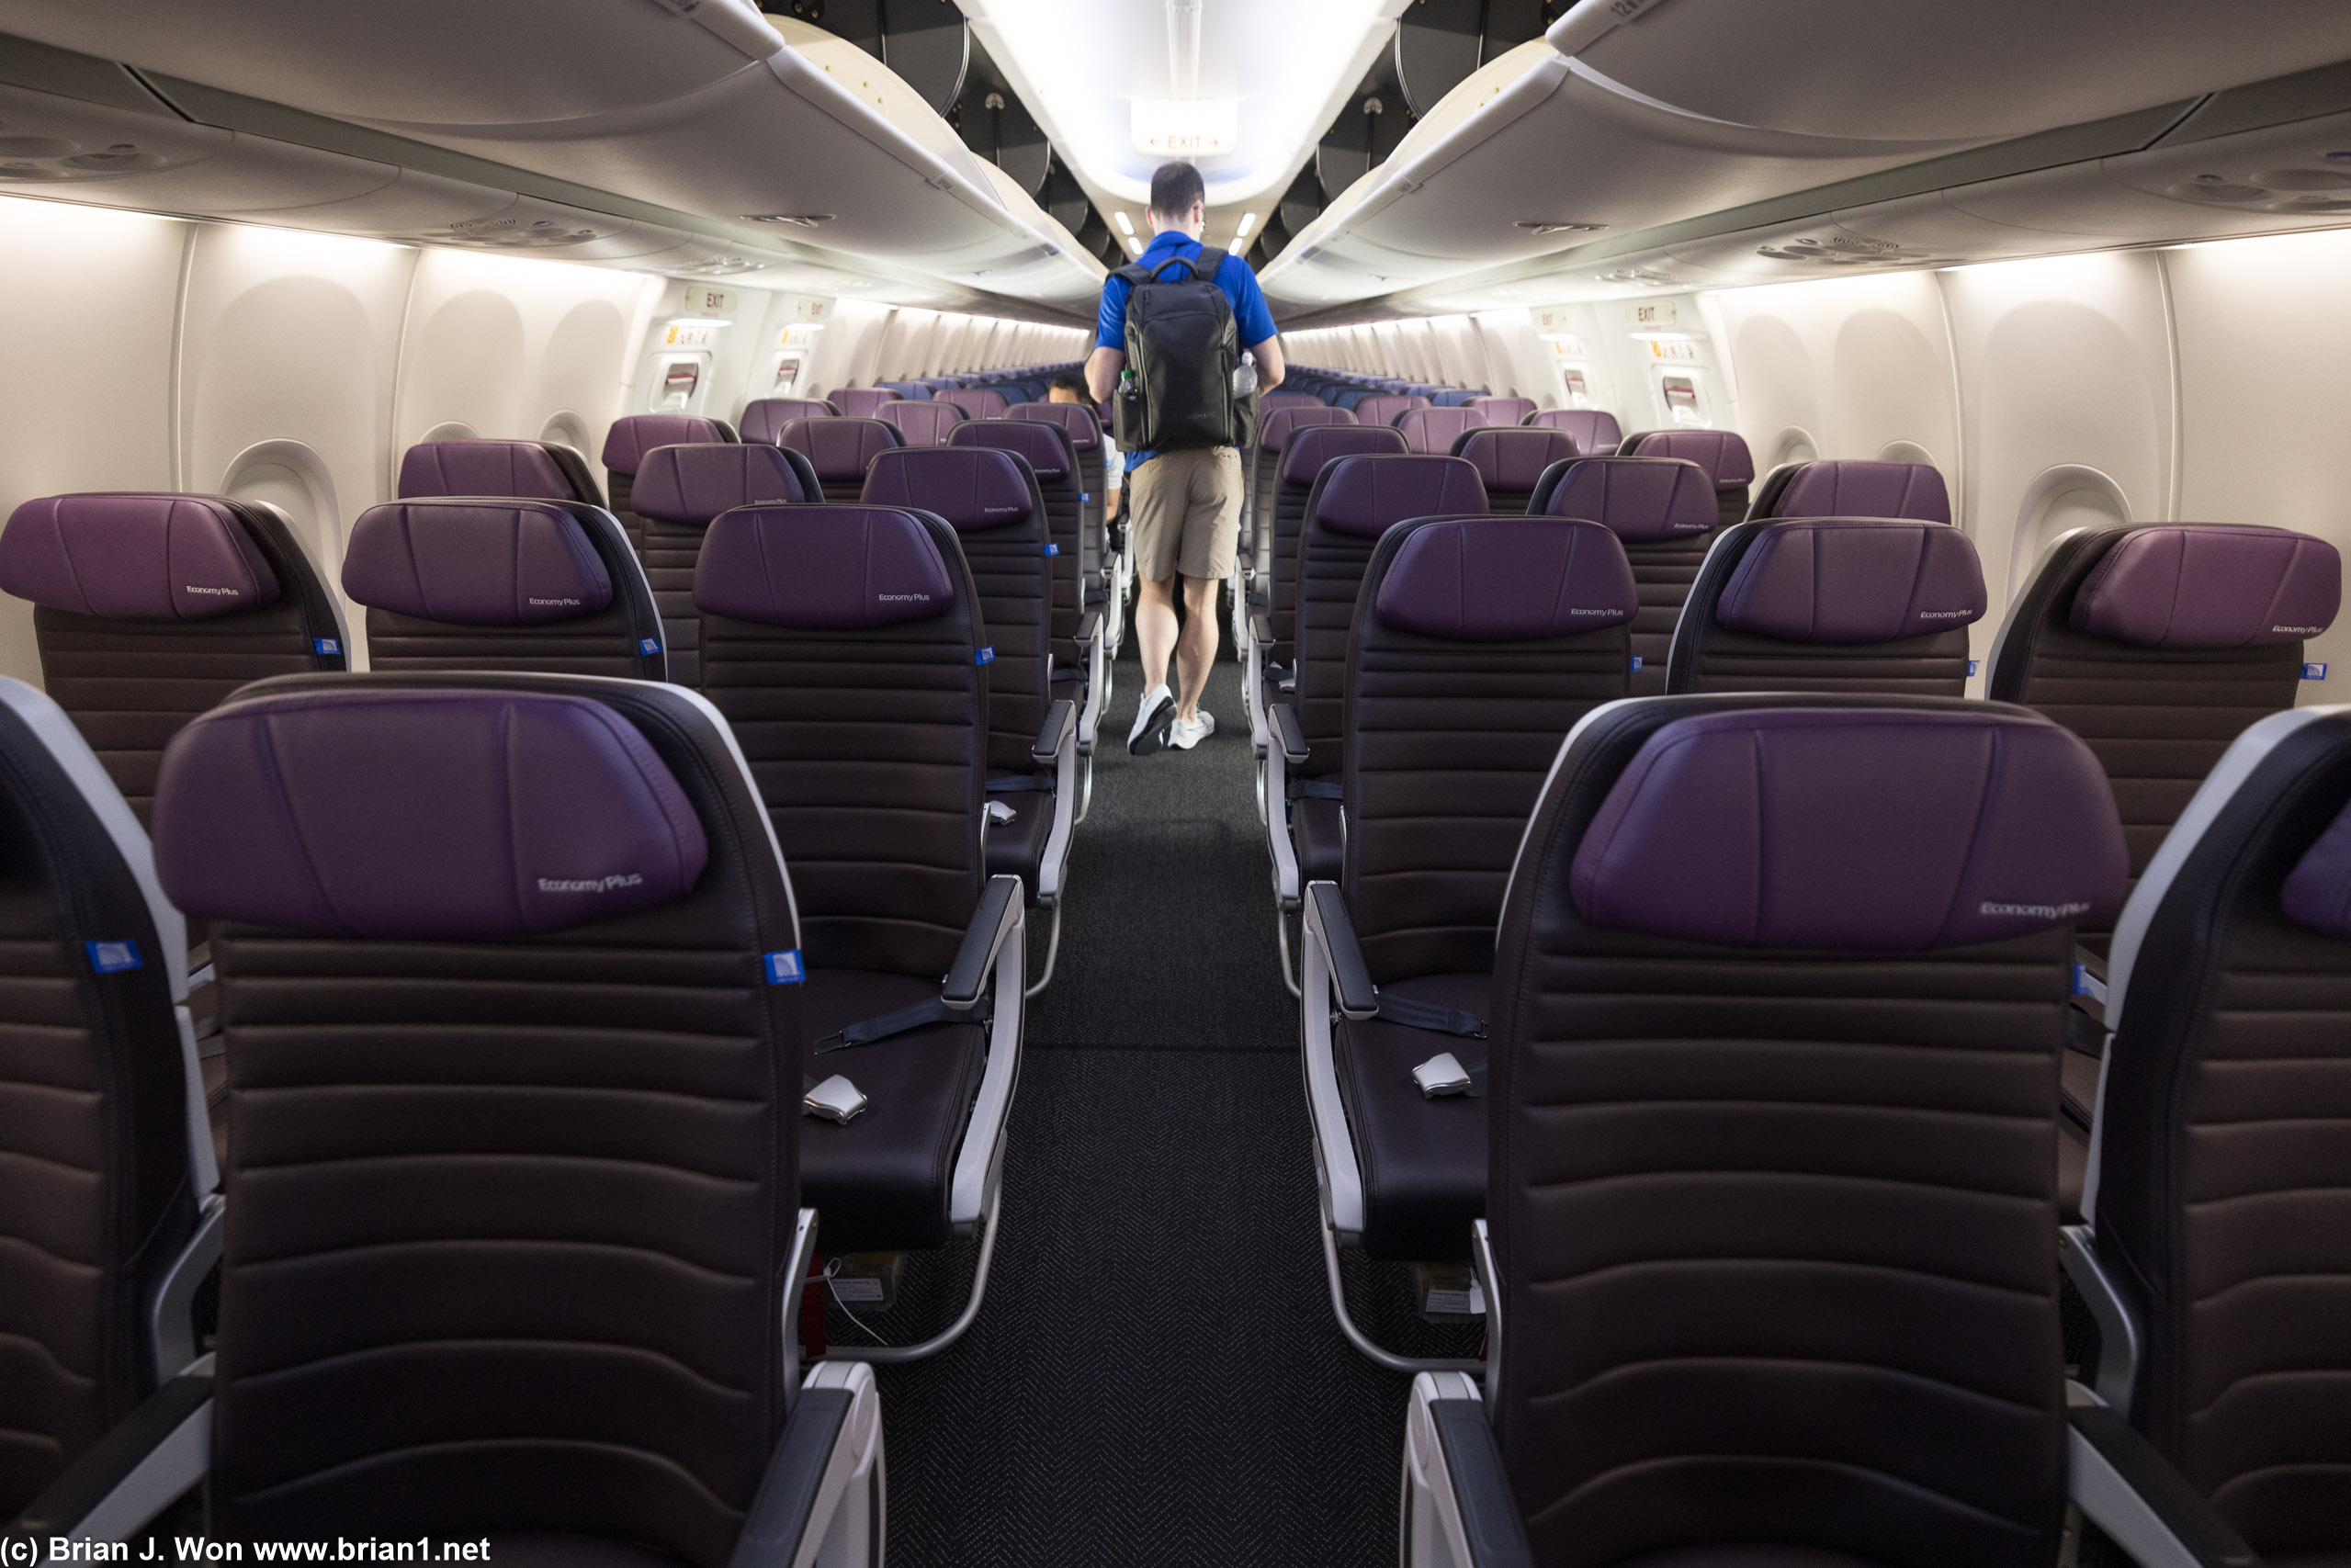 737 MAX 8 gets a purple instead of blue color scheme in Economy Plus.